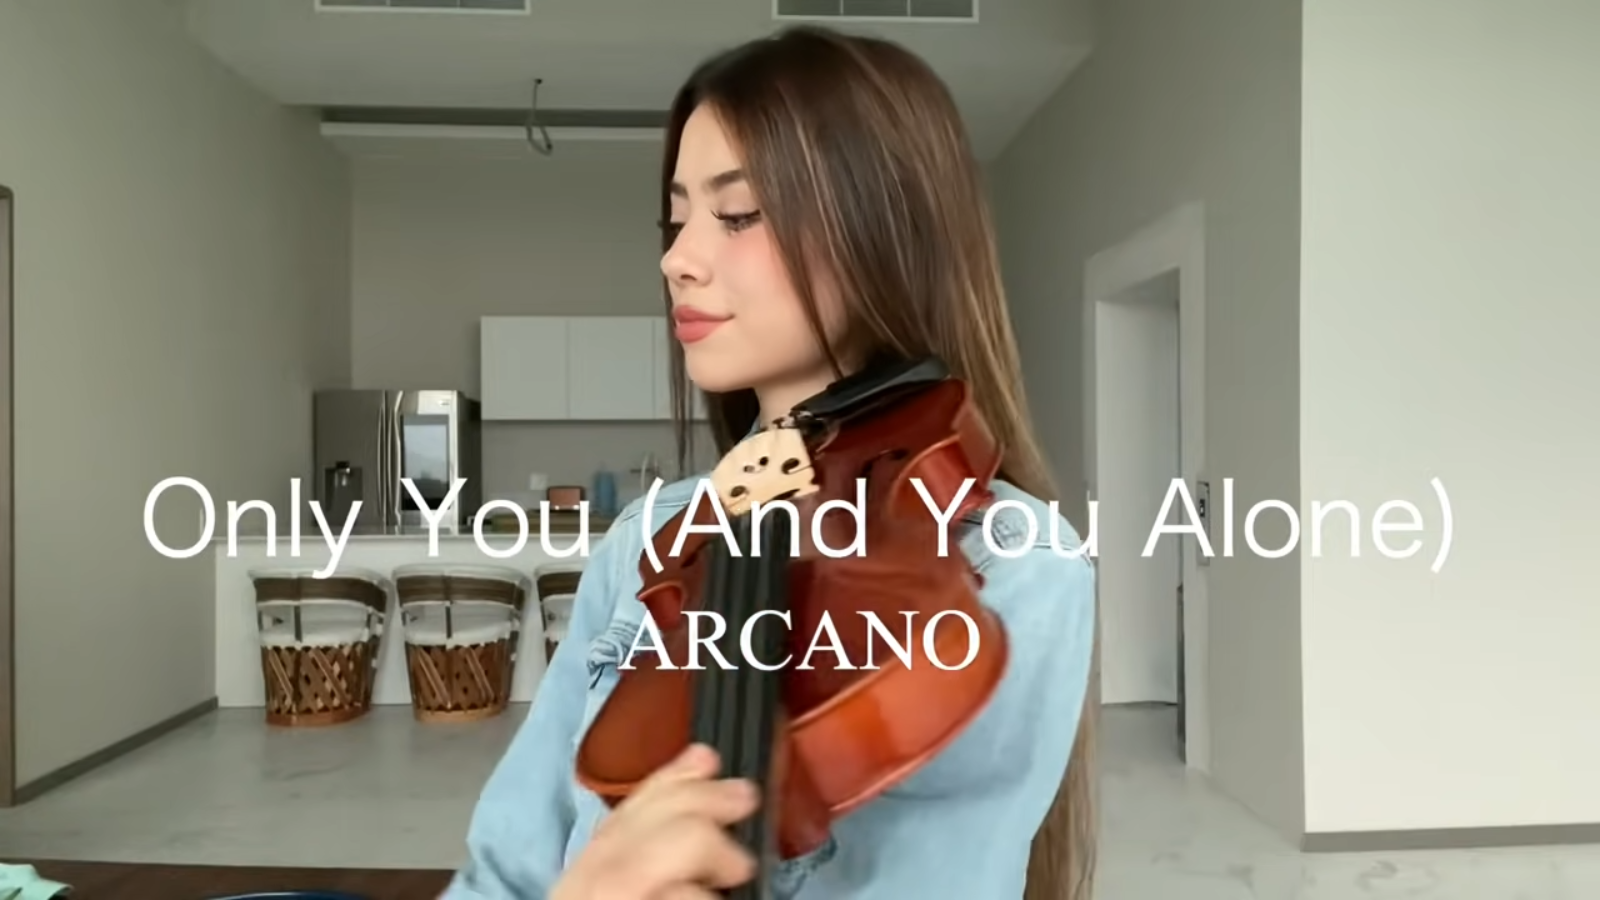 Arcano - Only you